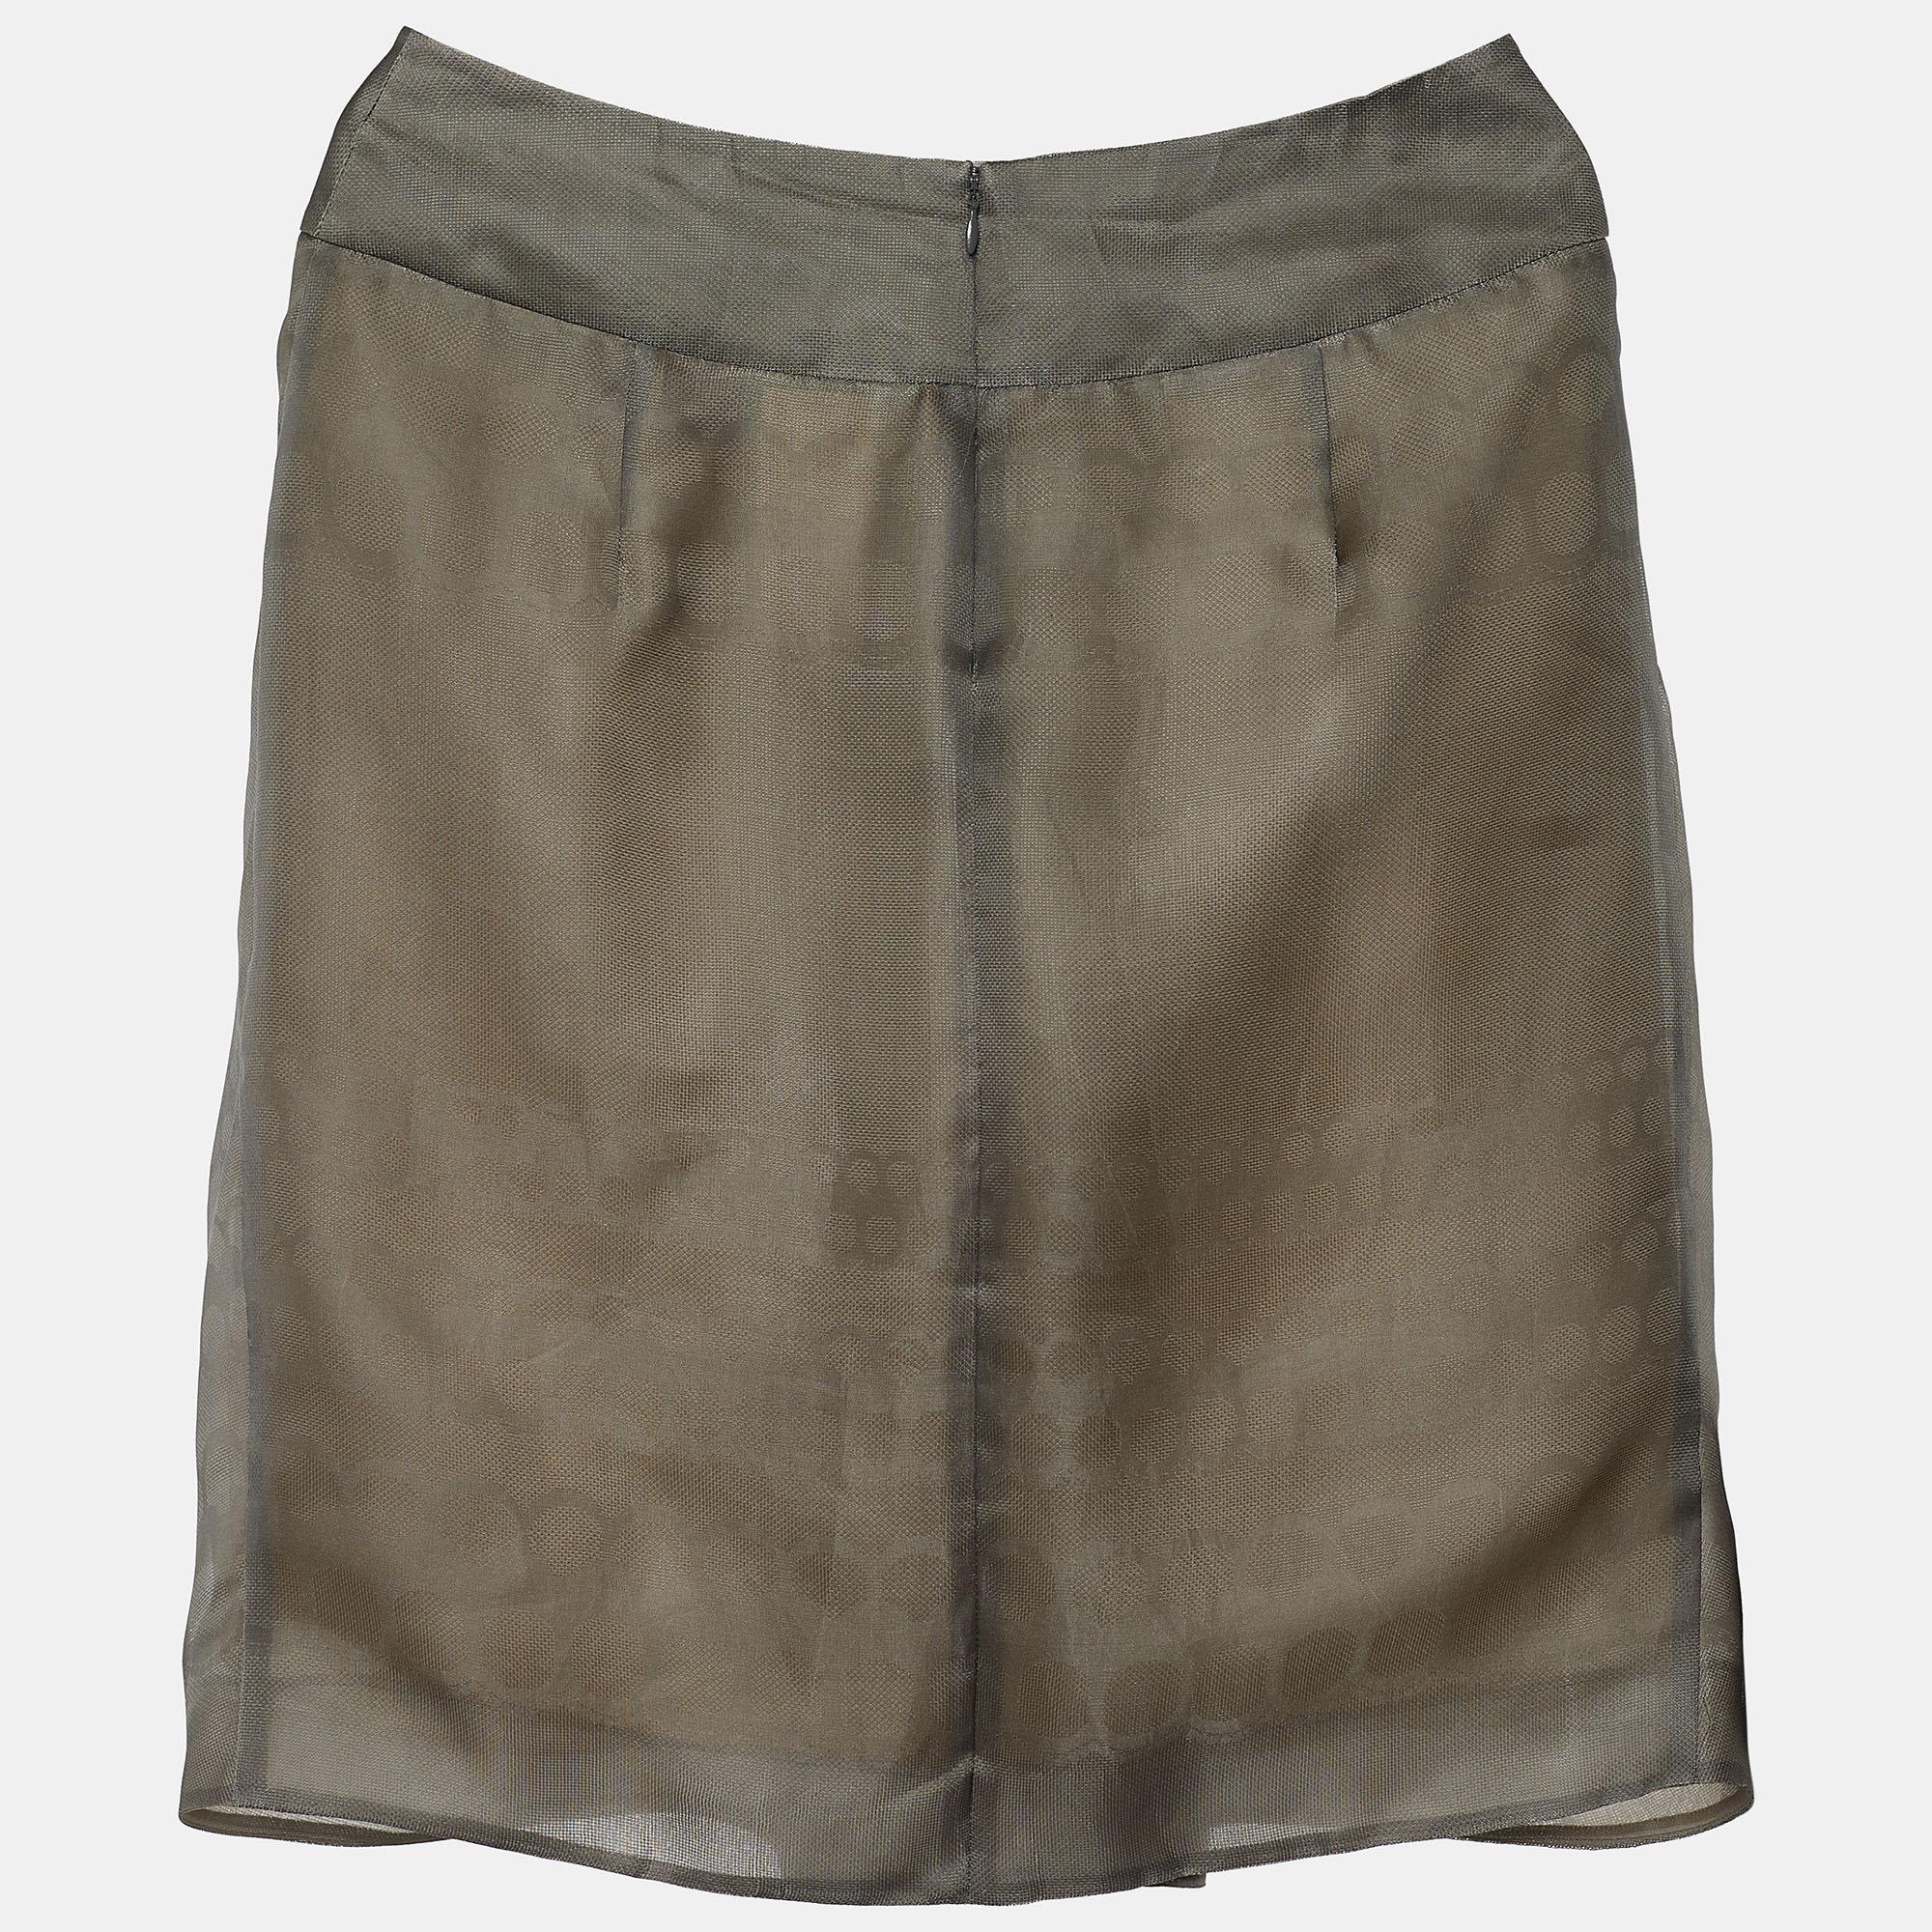 Make a fashion statement as you wear this skirt from the House of Valentino. Designed using grey silk fabric, this skirt is highlighted with pleated formations and provided with a zipper for fastening. Your attire will look chic with this Valentino